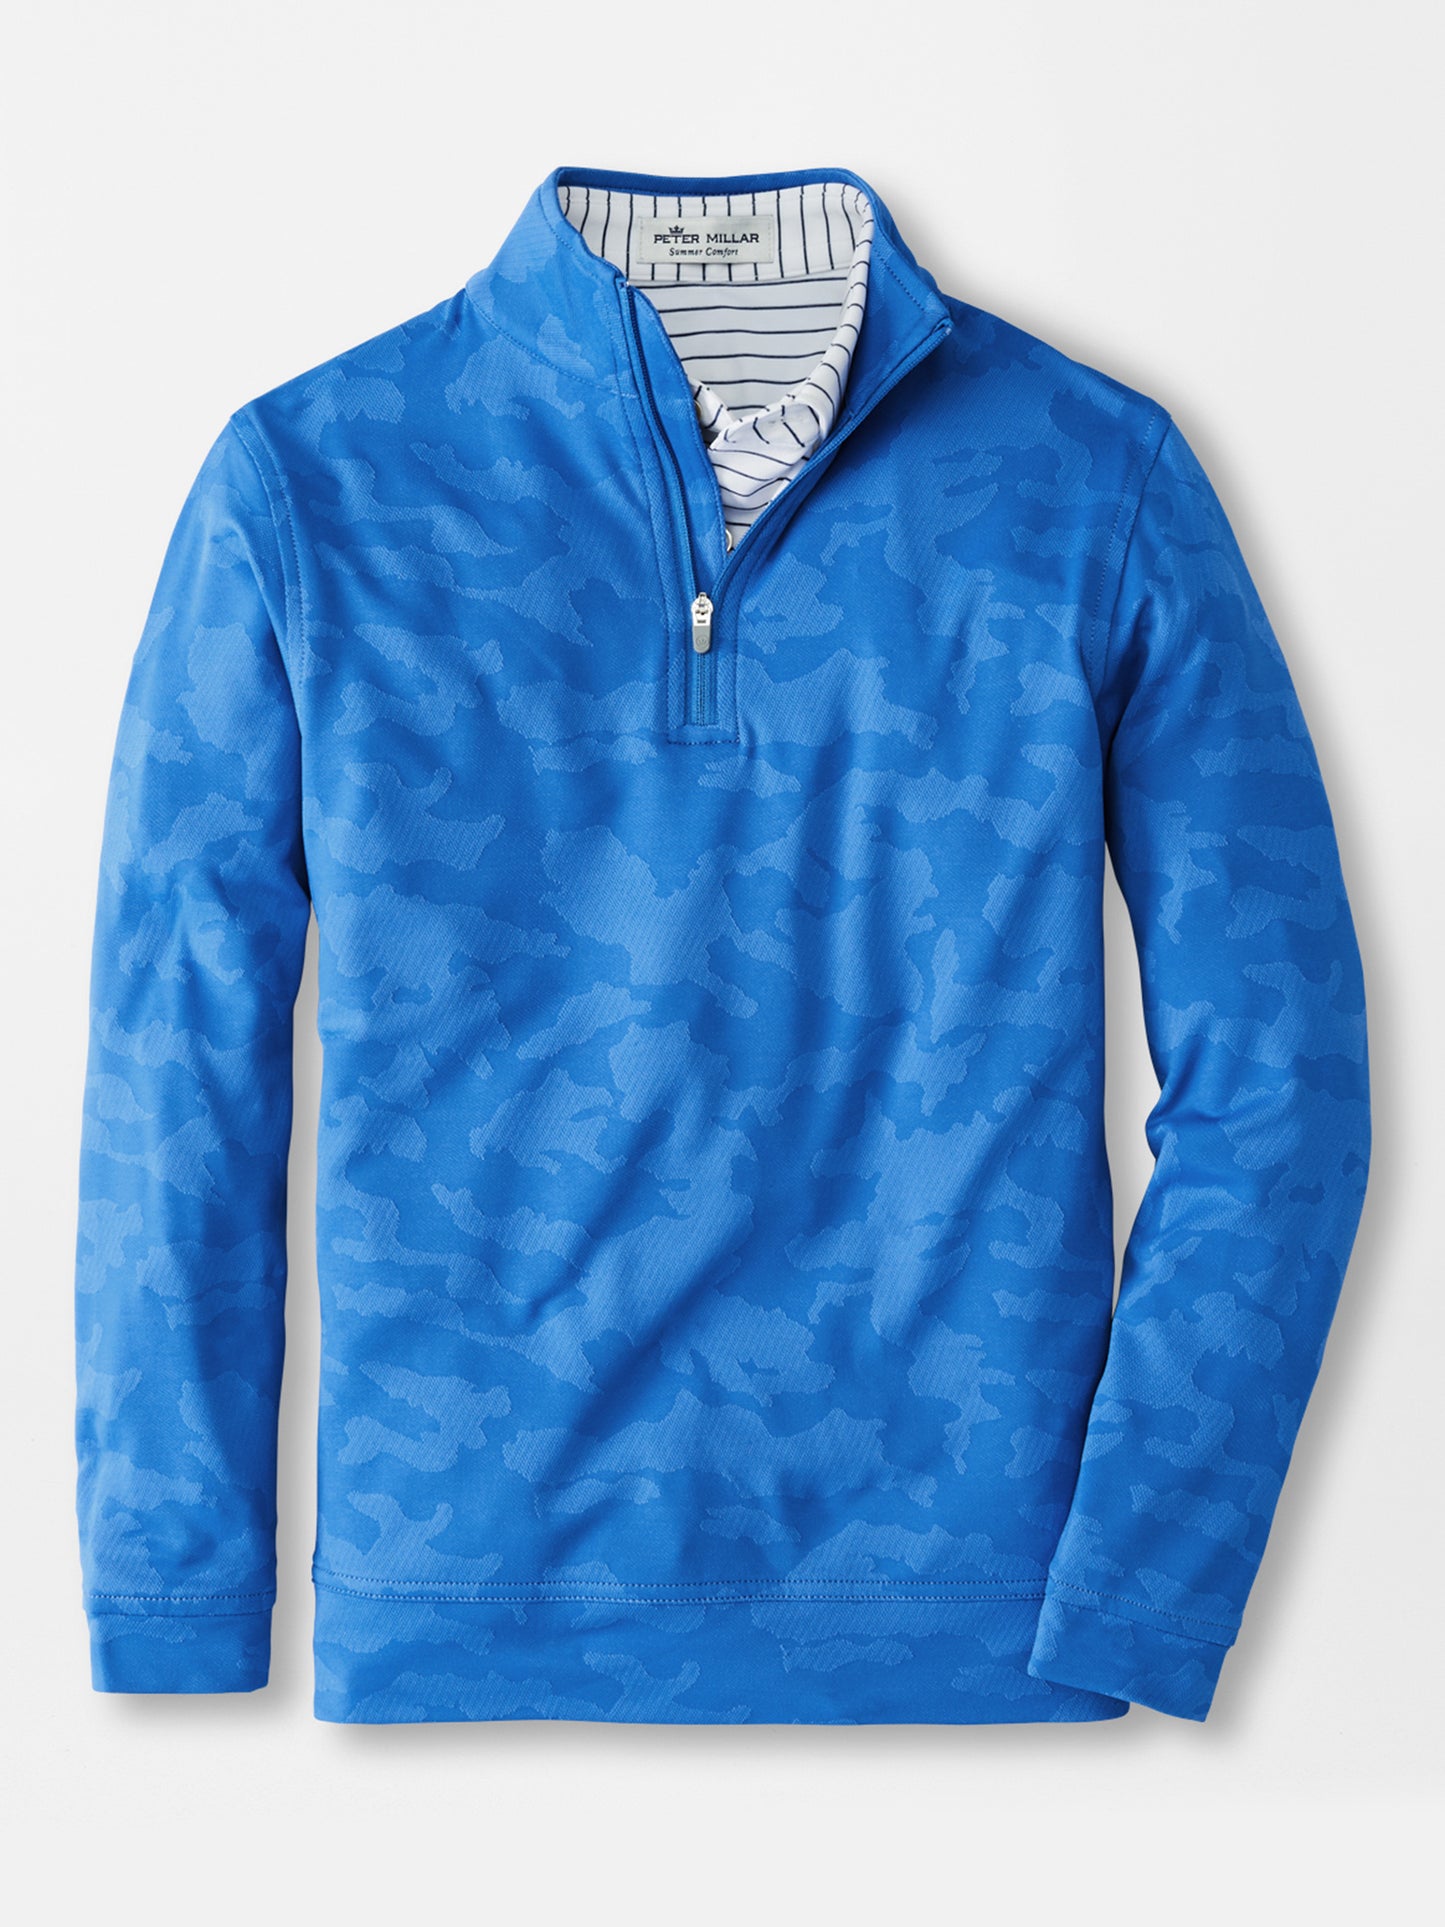 Peter Millar Youth Collection Boys' Jacquard Perth Performance Pullover